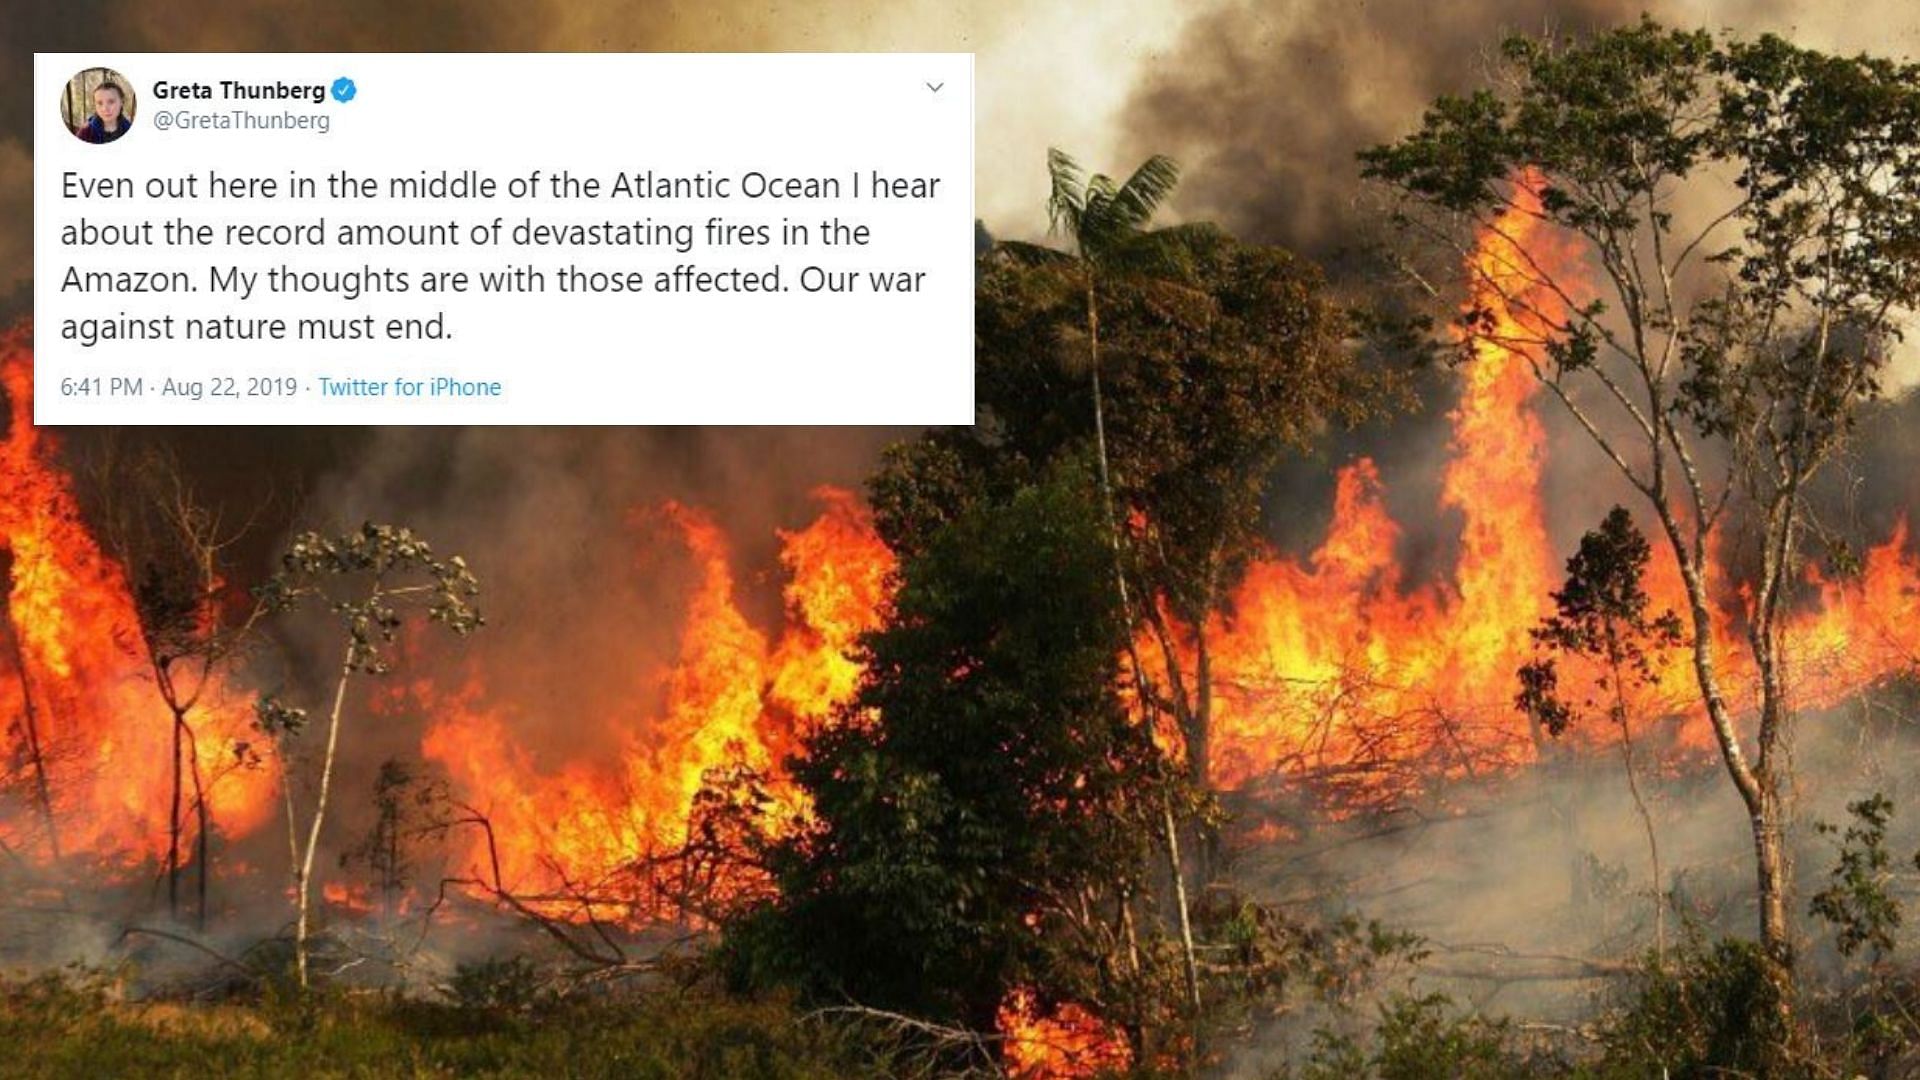 Fire in the Amazon rainforest has caused panic and alarm across the globe